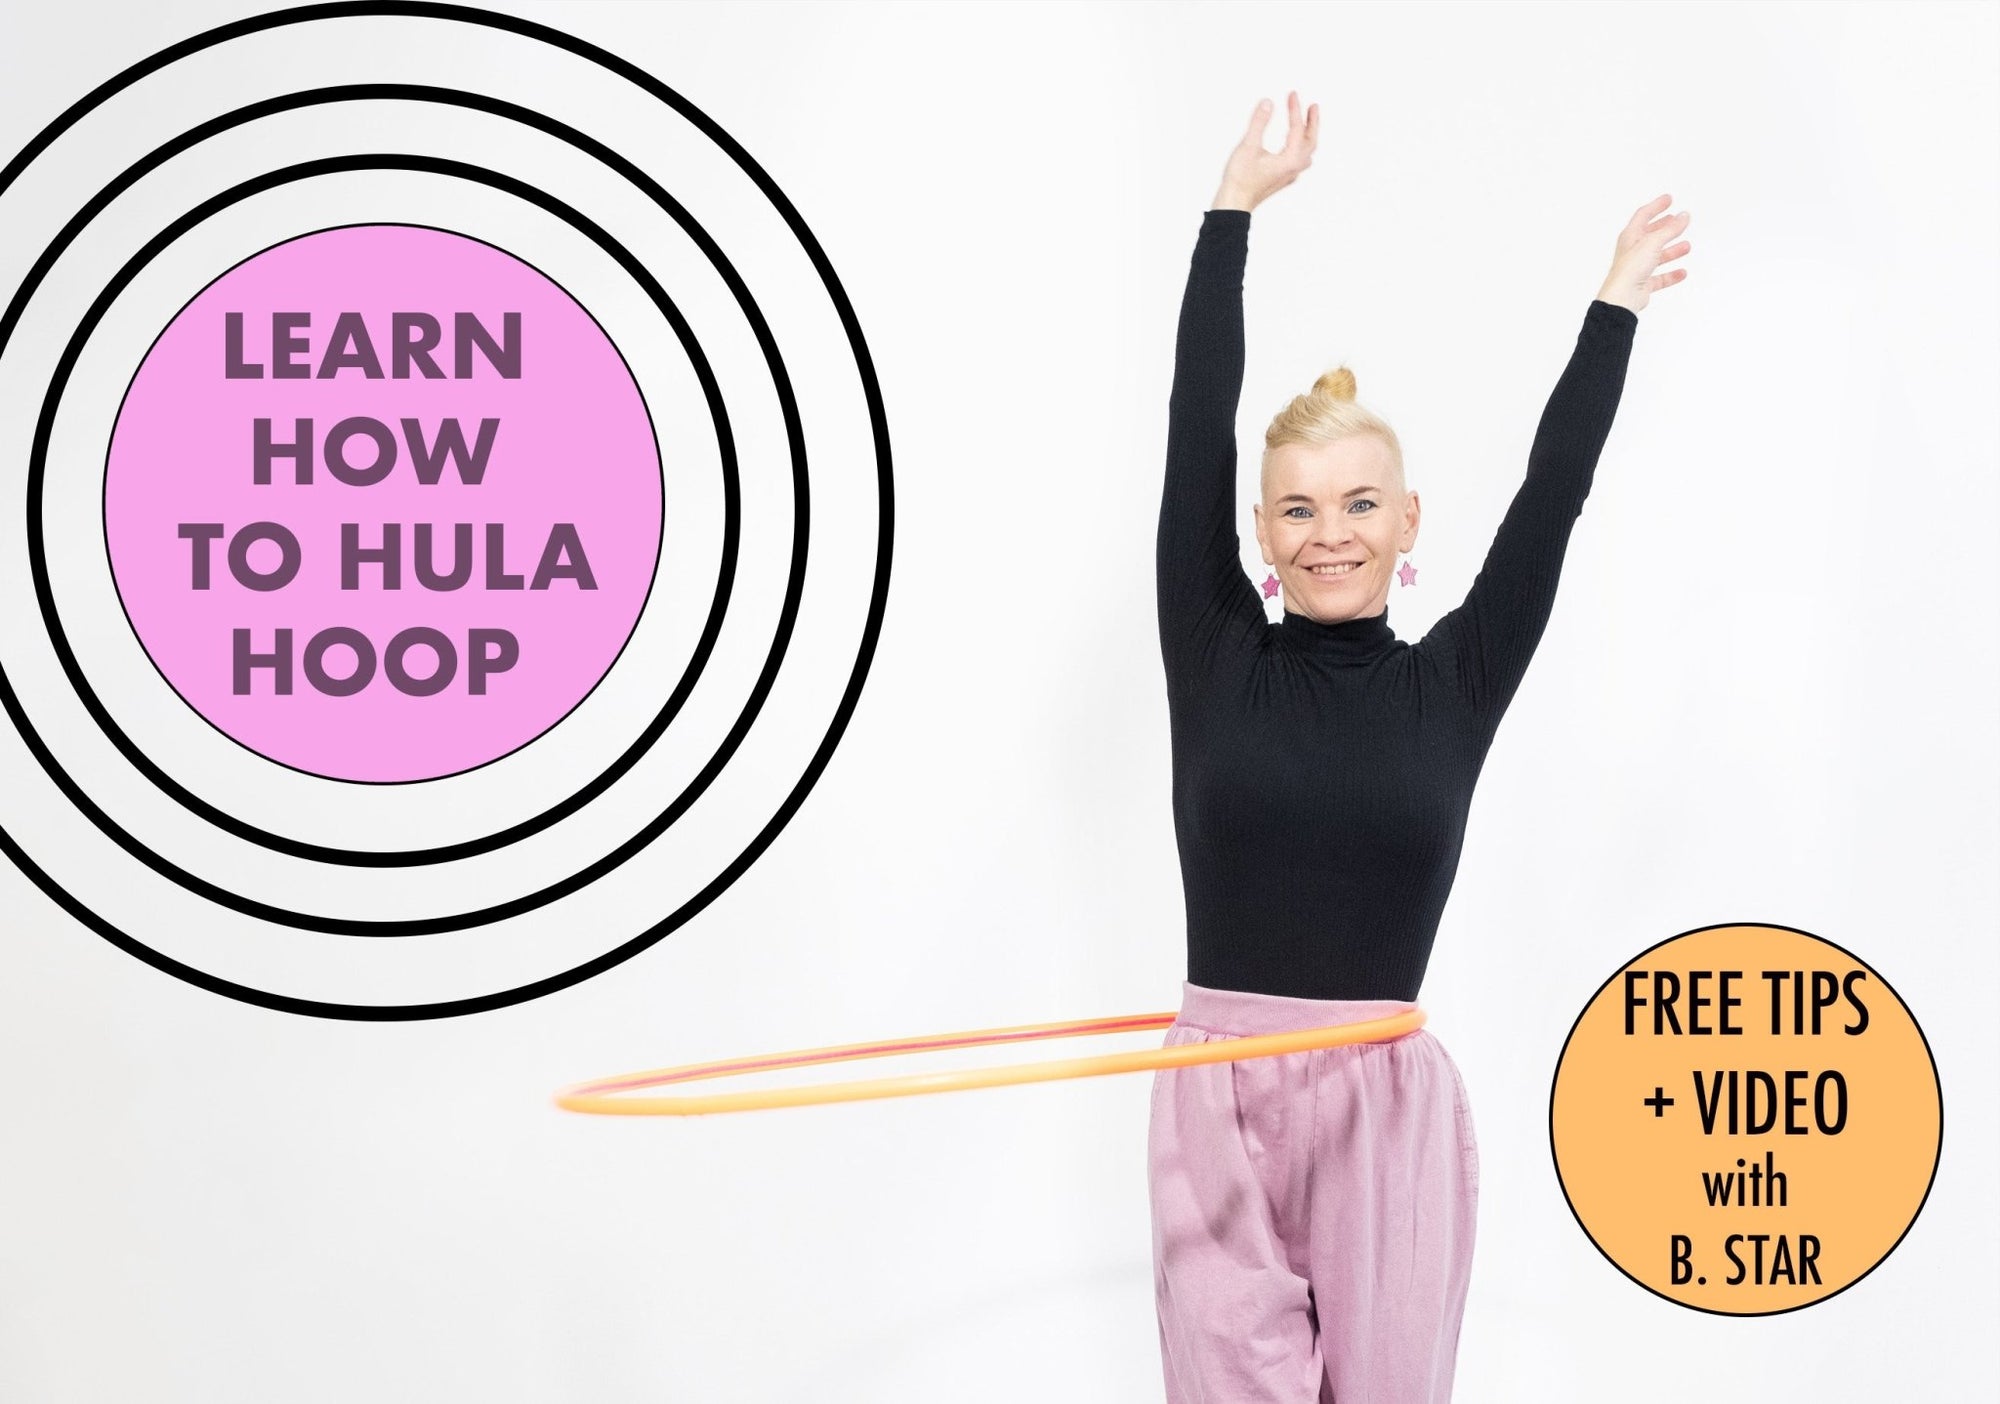 Choosing the Right Size Hula Hoop - The Ultimate Guide - Hoop Empire